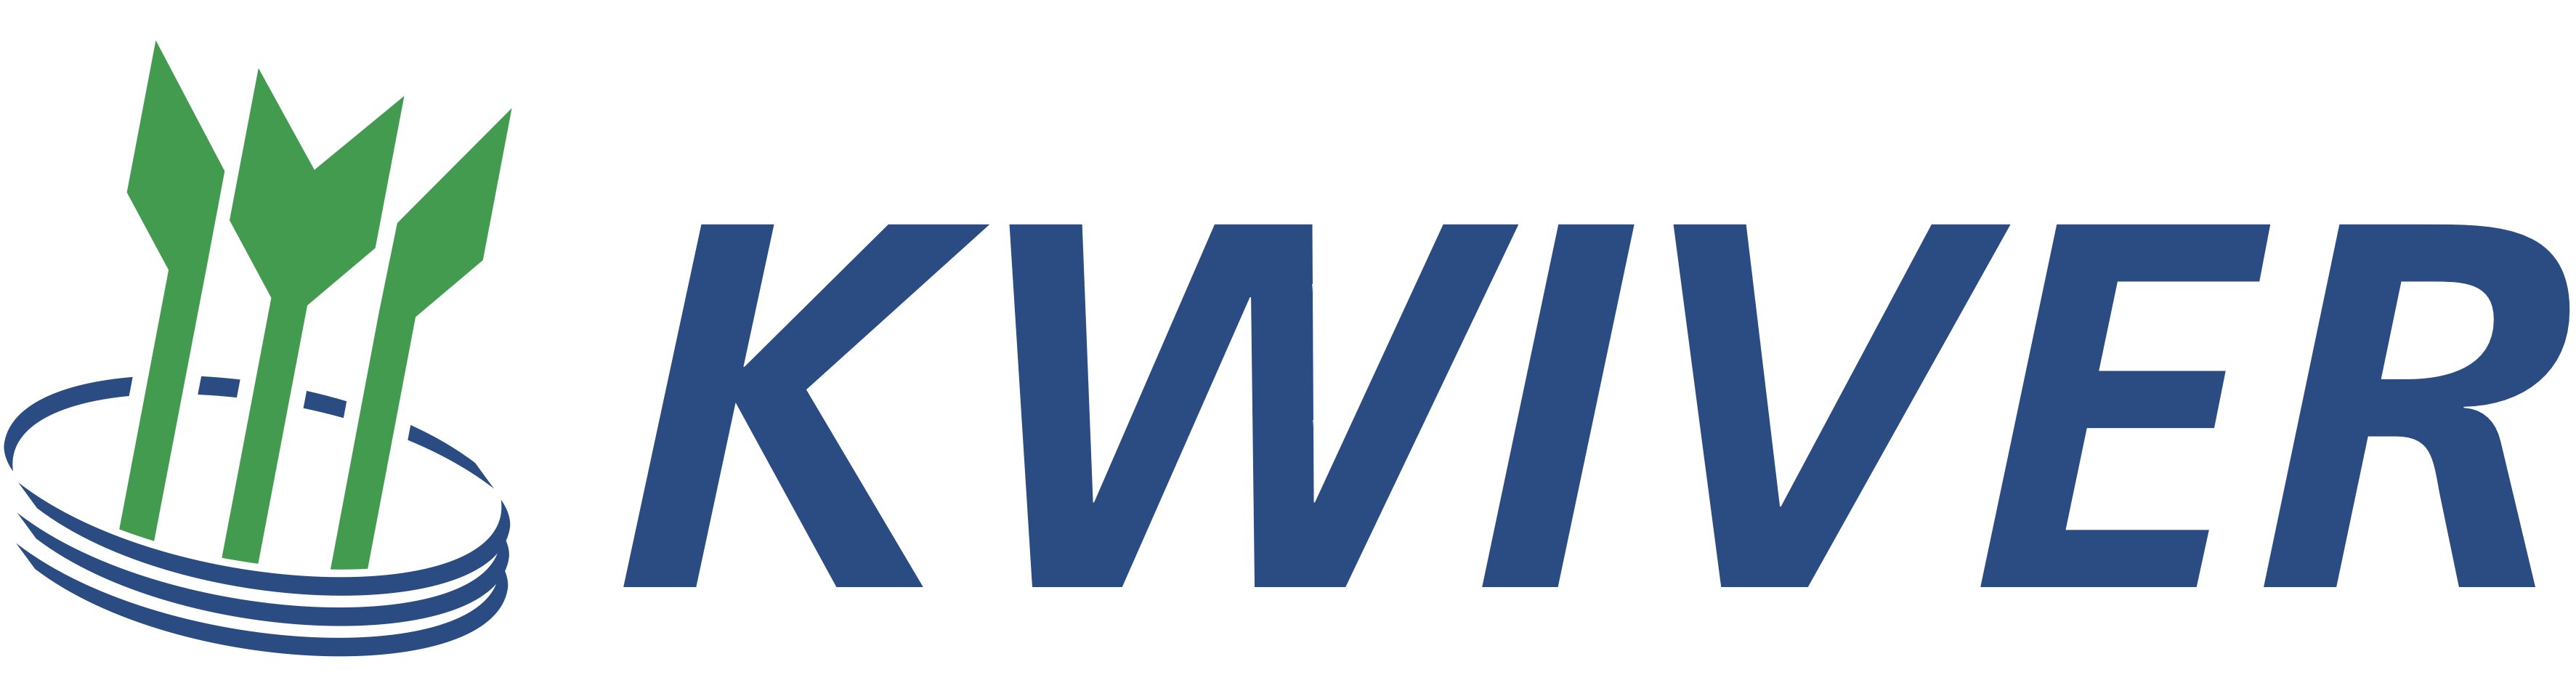 _images/KWIVER_logo.png